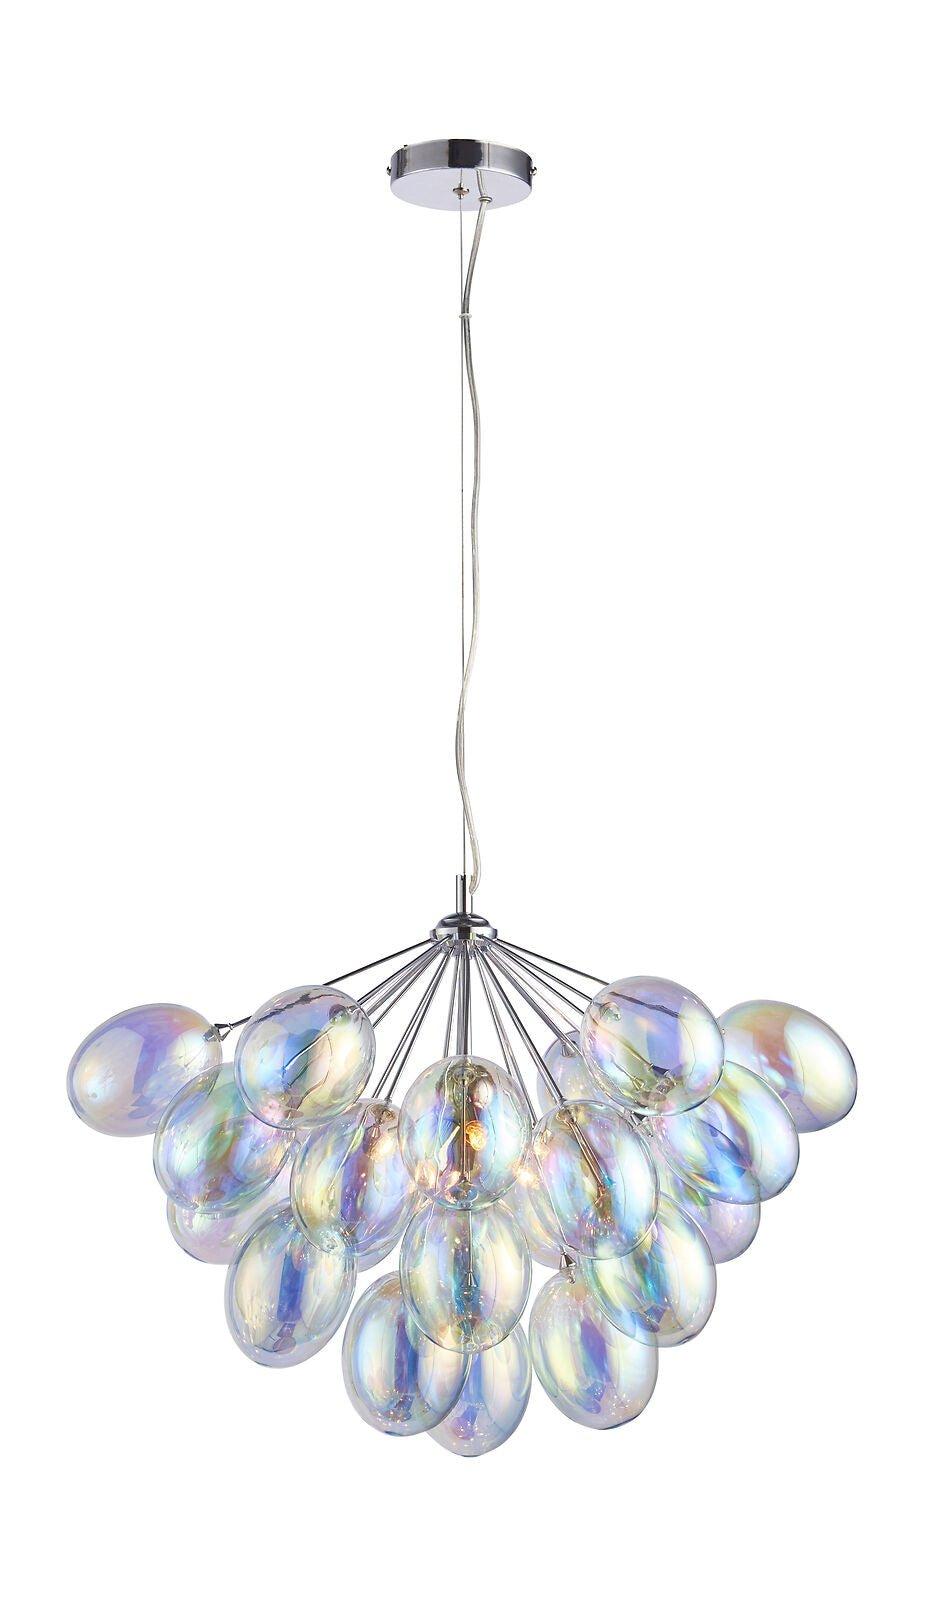 Ceiling Pendant Light Chrome Plate & Iridescent Glass 6 x 28W G9 Dimmable